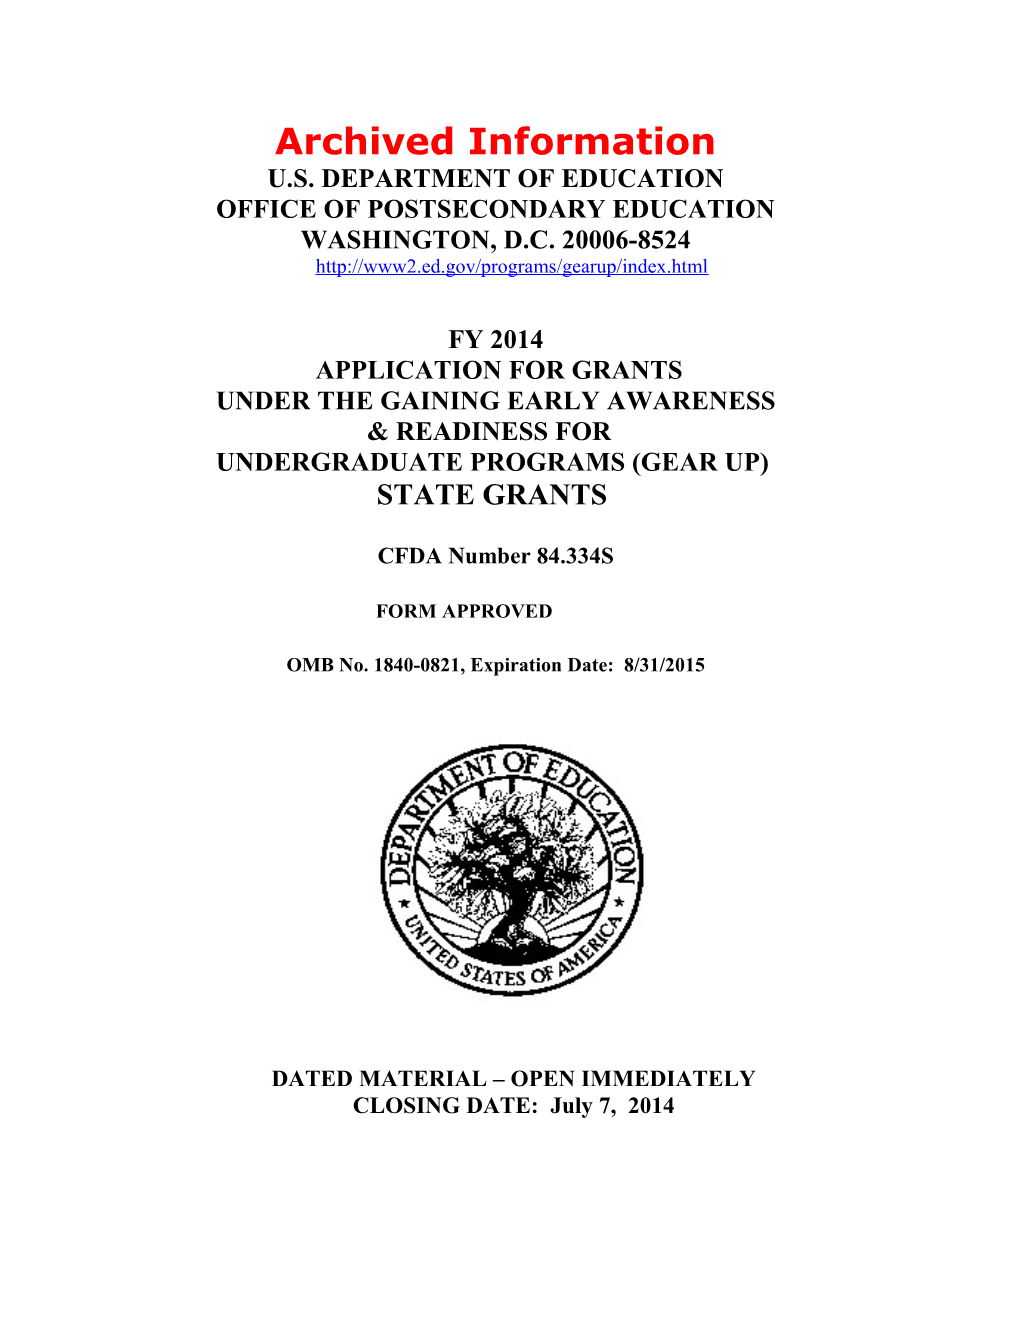 Archived: FY 2014 Grant Application - GEAR up State Grants (MS Word)